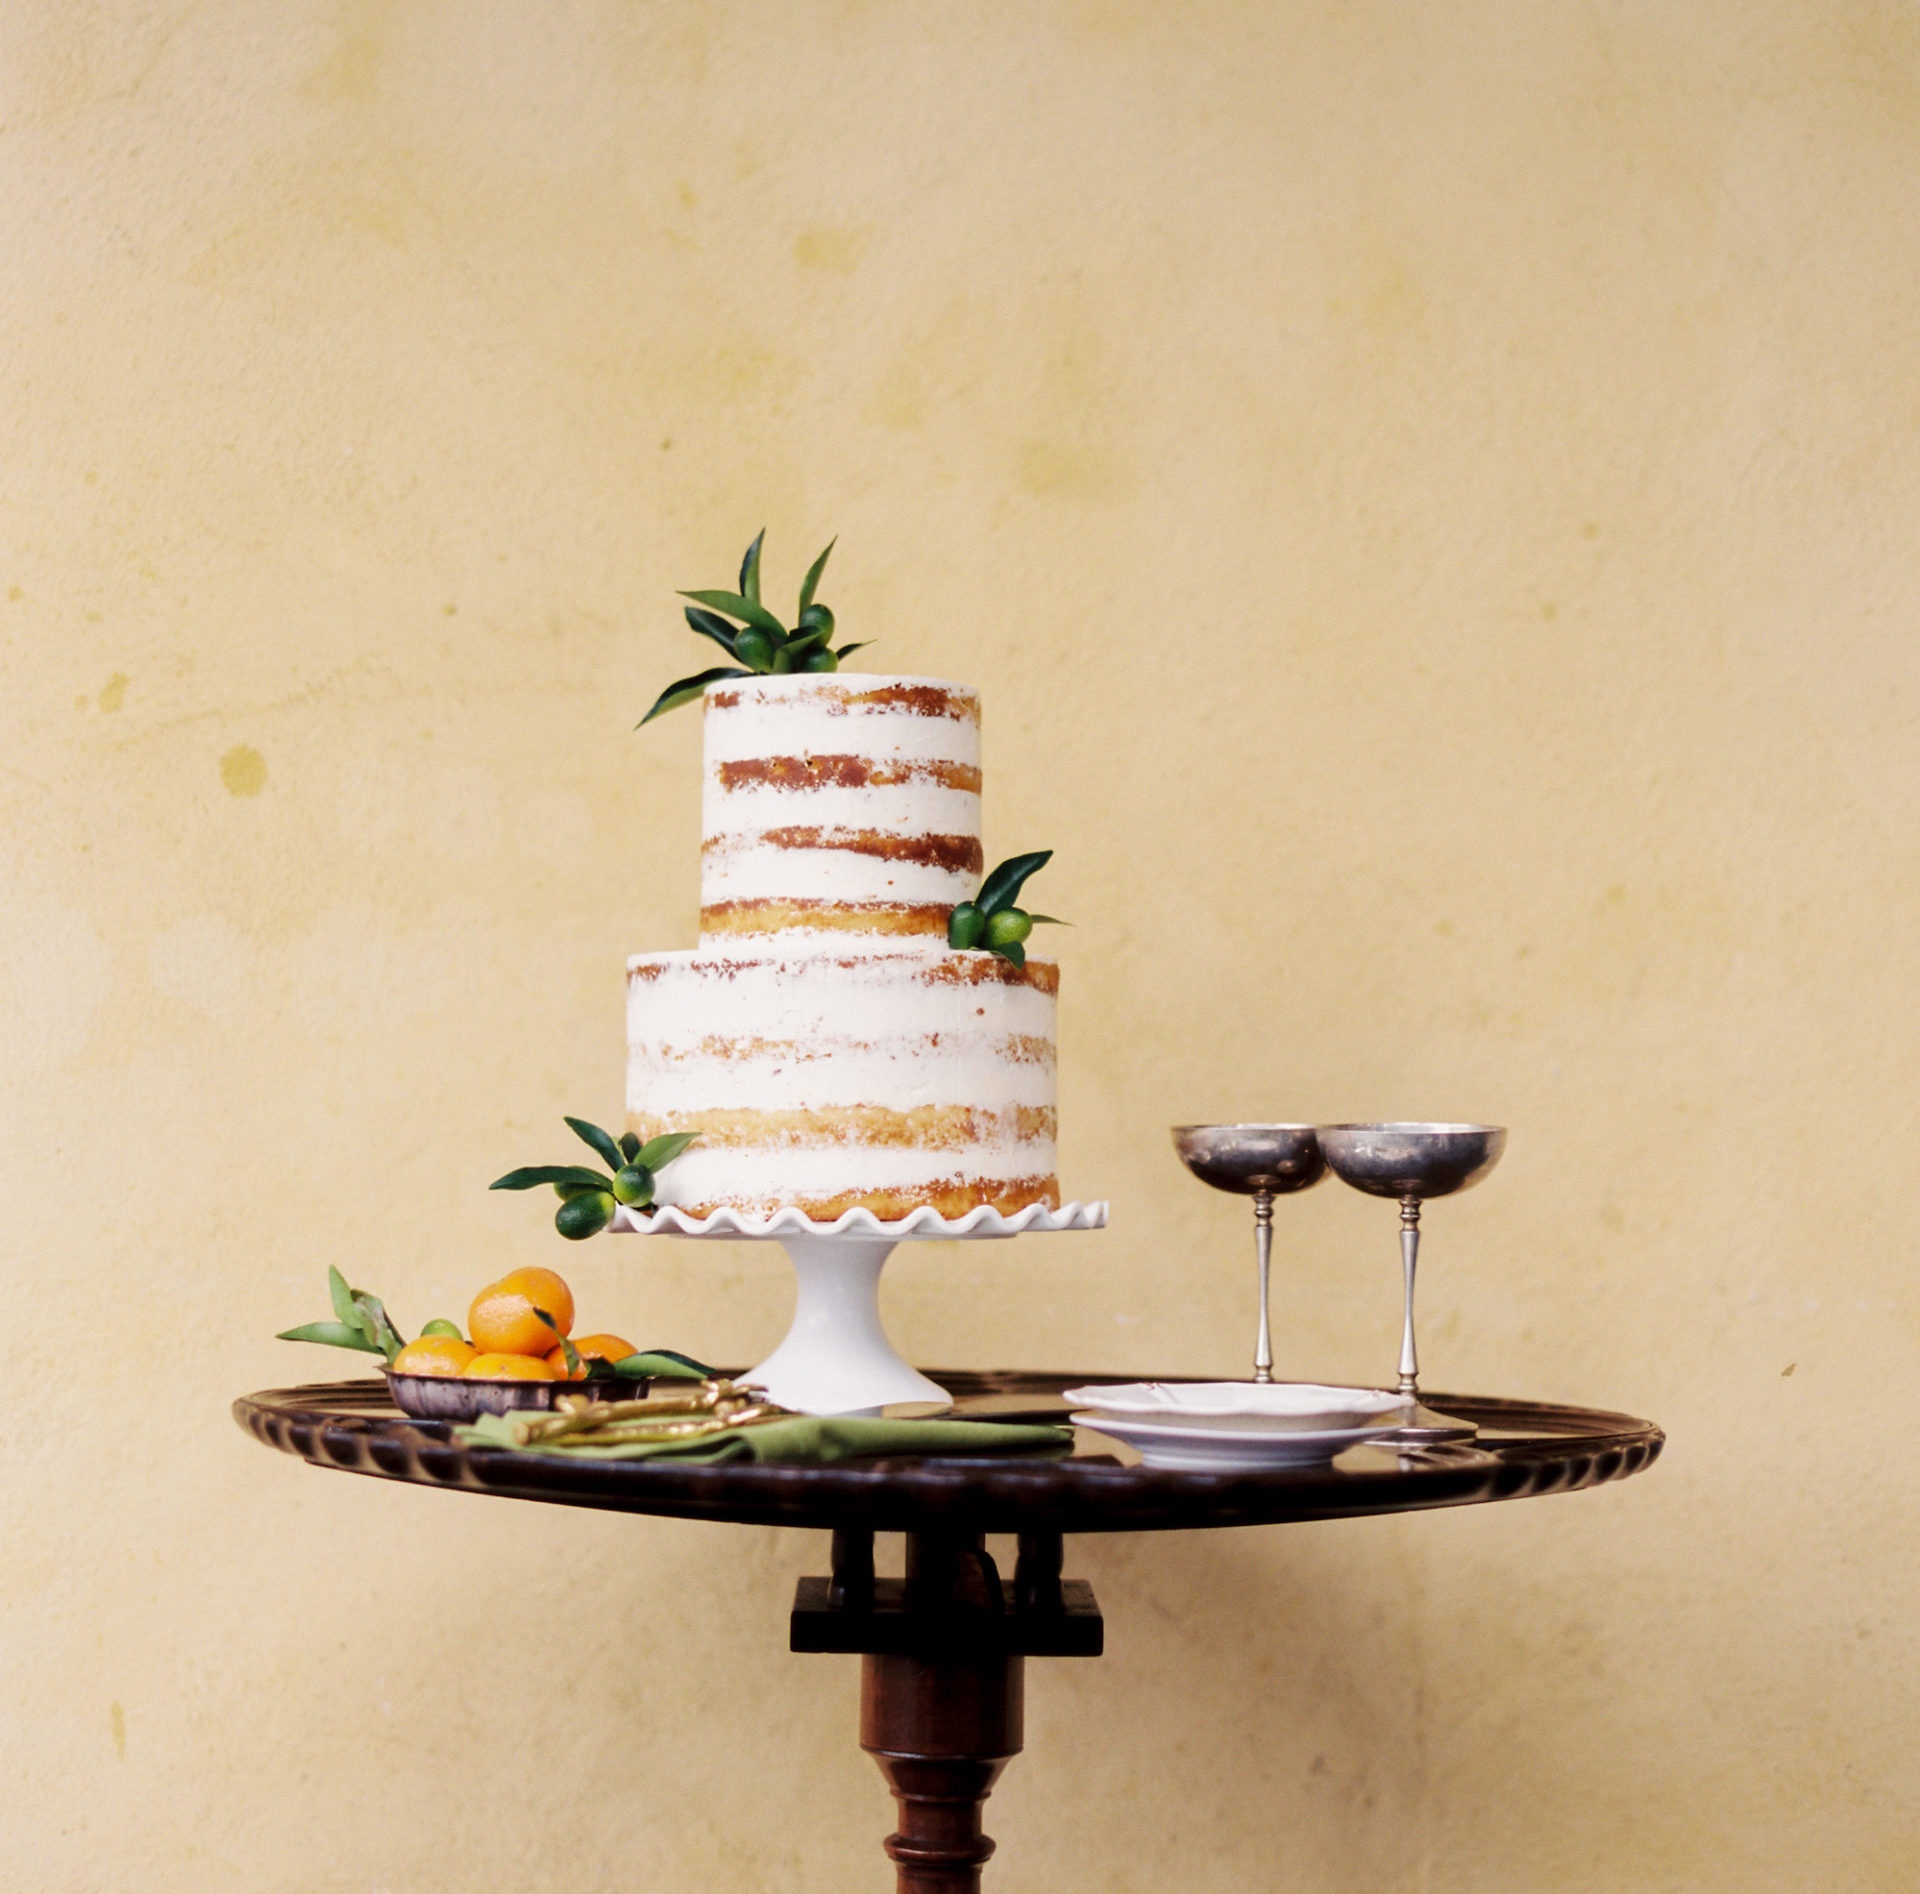 Tropical wedding cake in Oahu Hawaii by J.J. Au'Clair, a luxury destination wedding photographer serving Oahu, Spain, Mexico, and beyond!